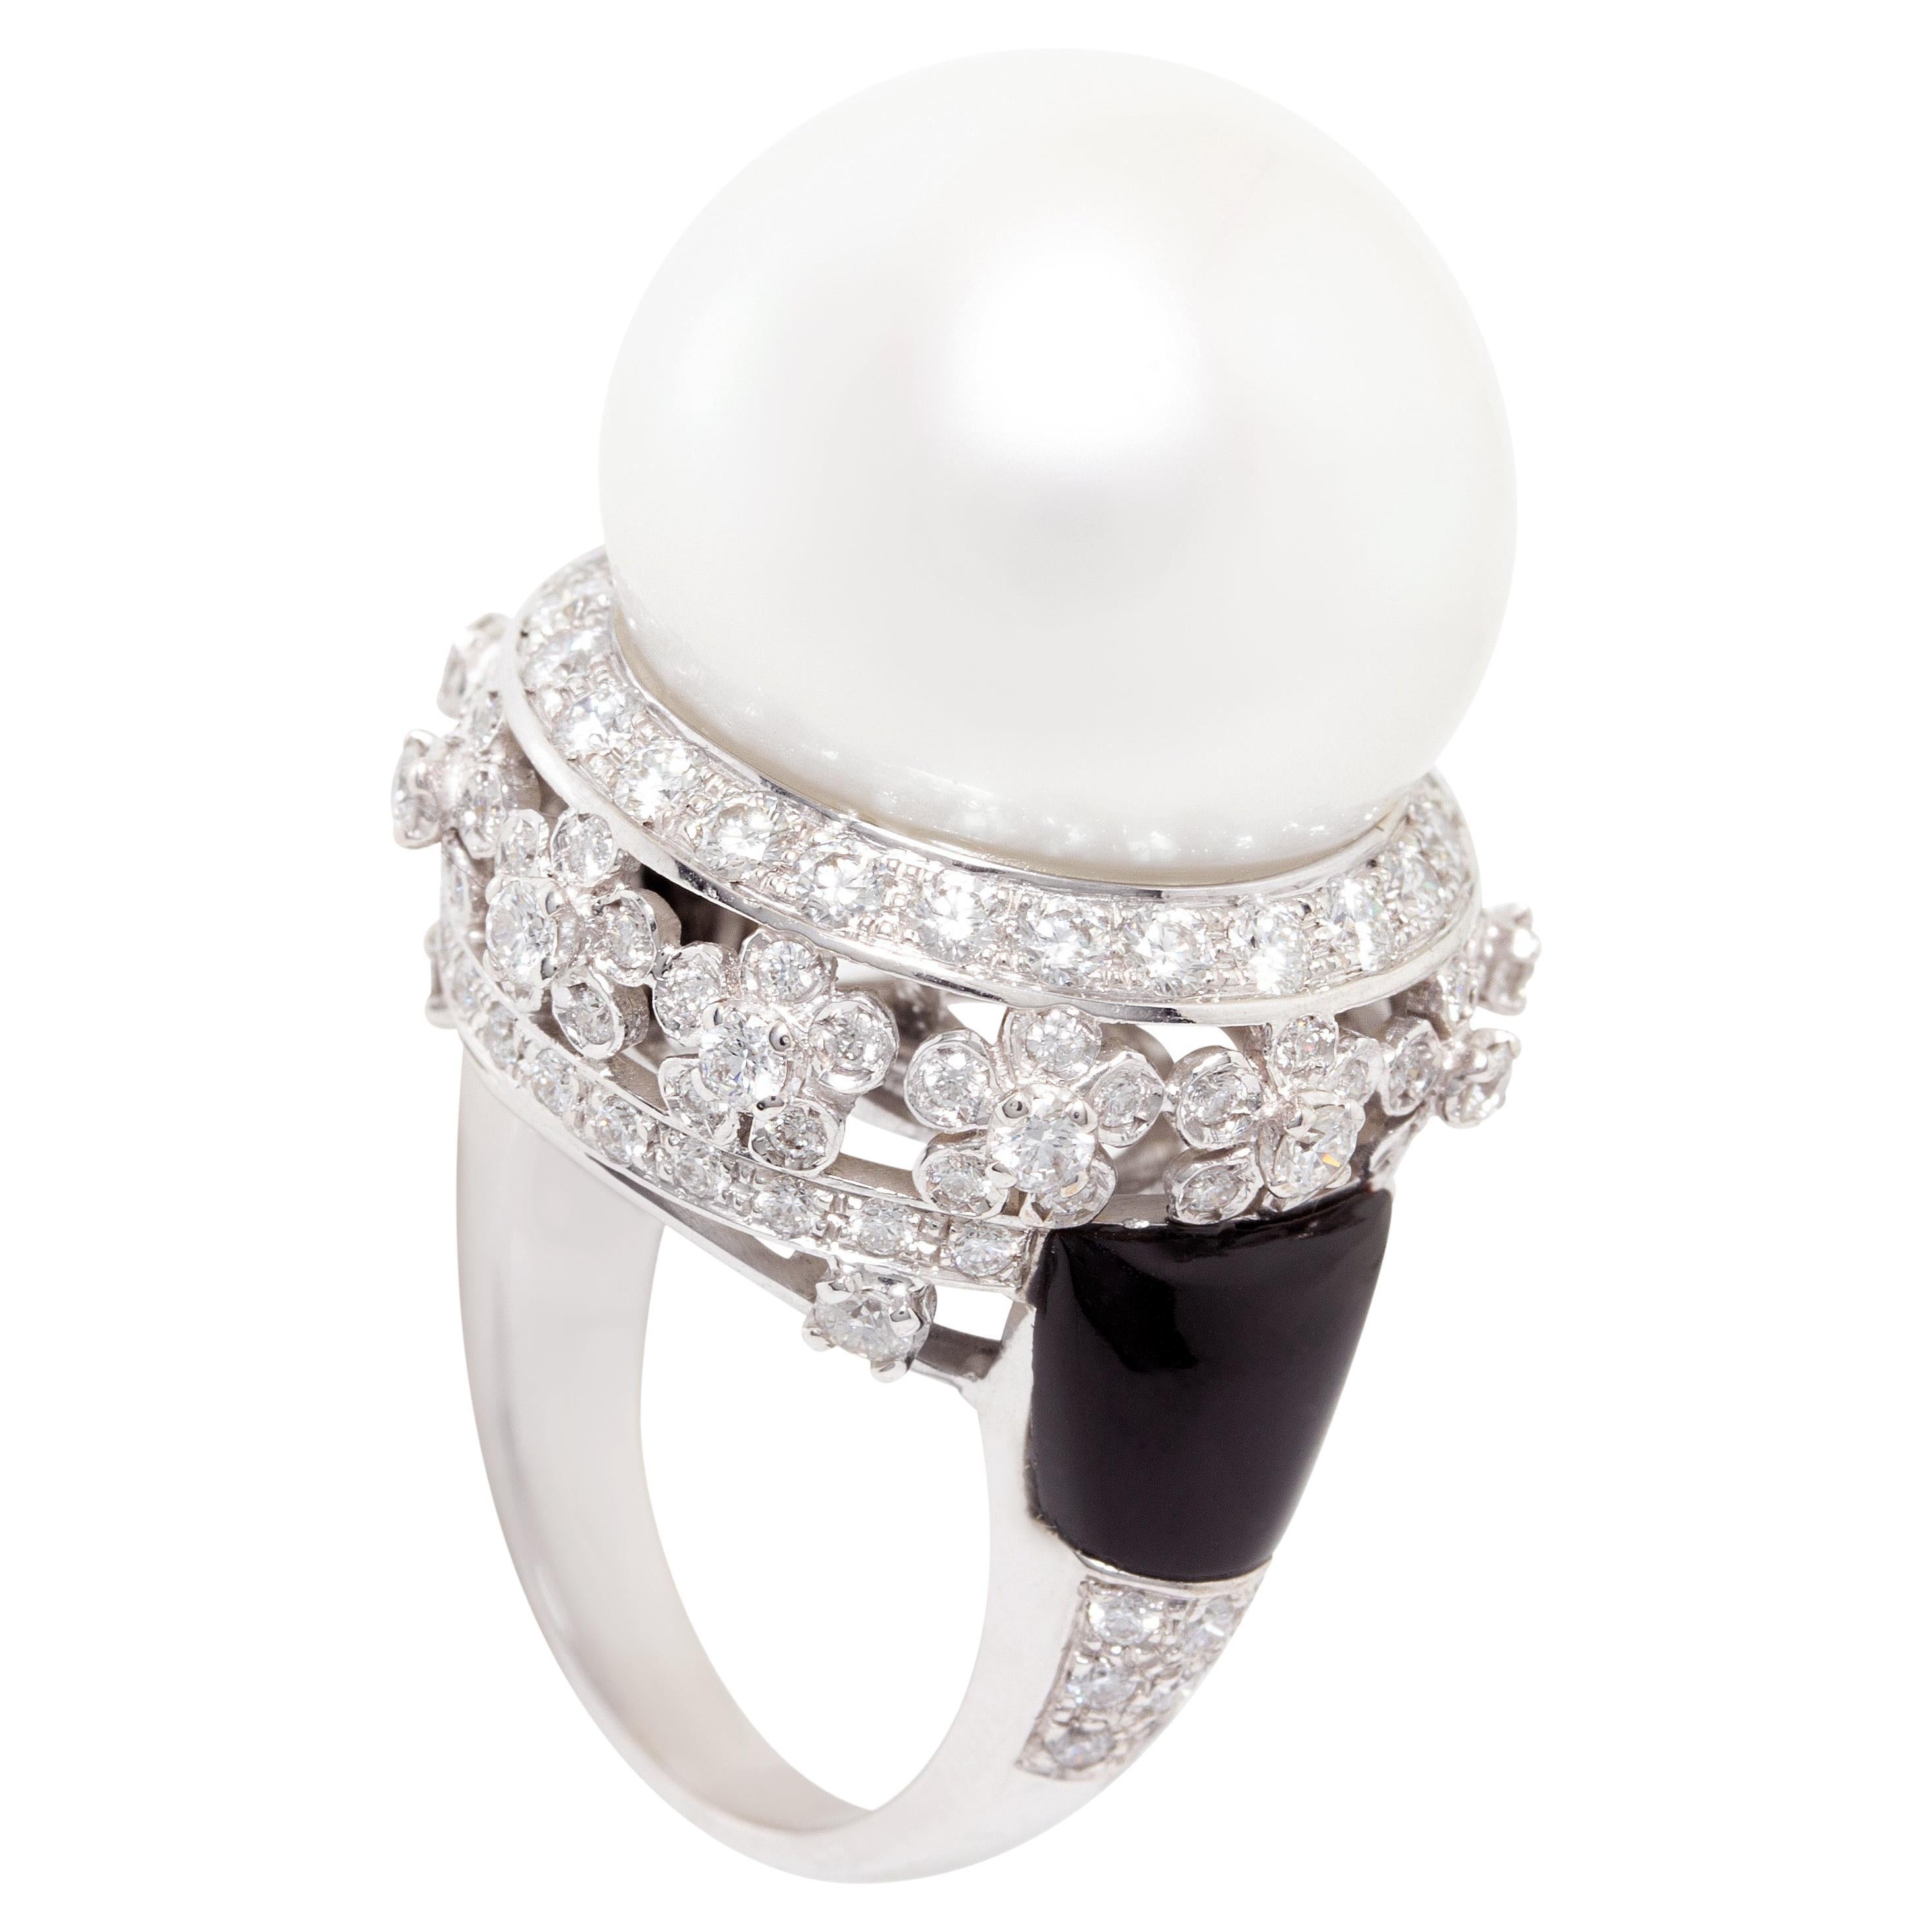 Ella Gafter Art Déco style 19mm South Sea Pearl Diamond Ring  For Sale